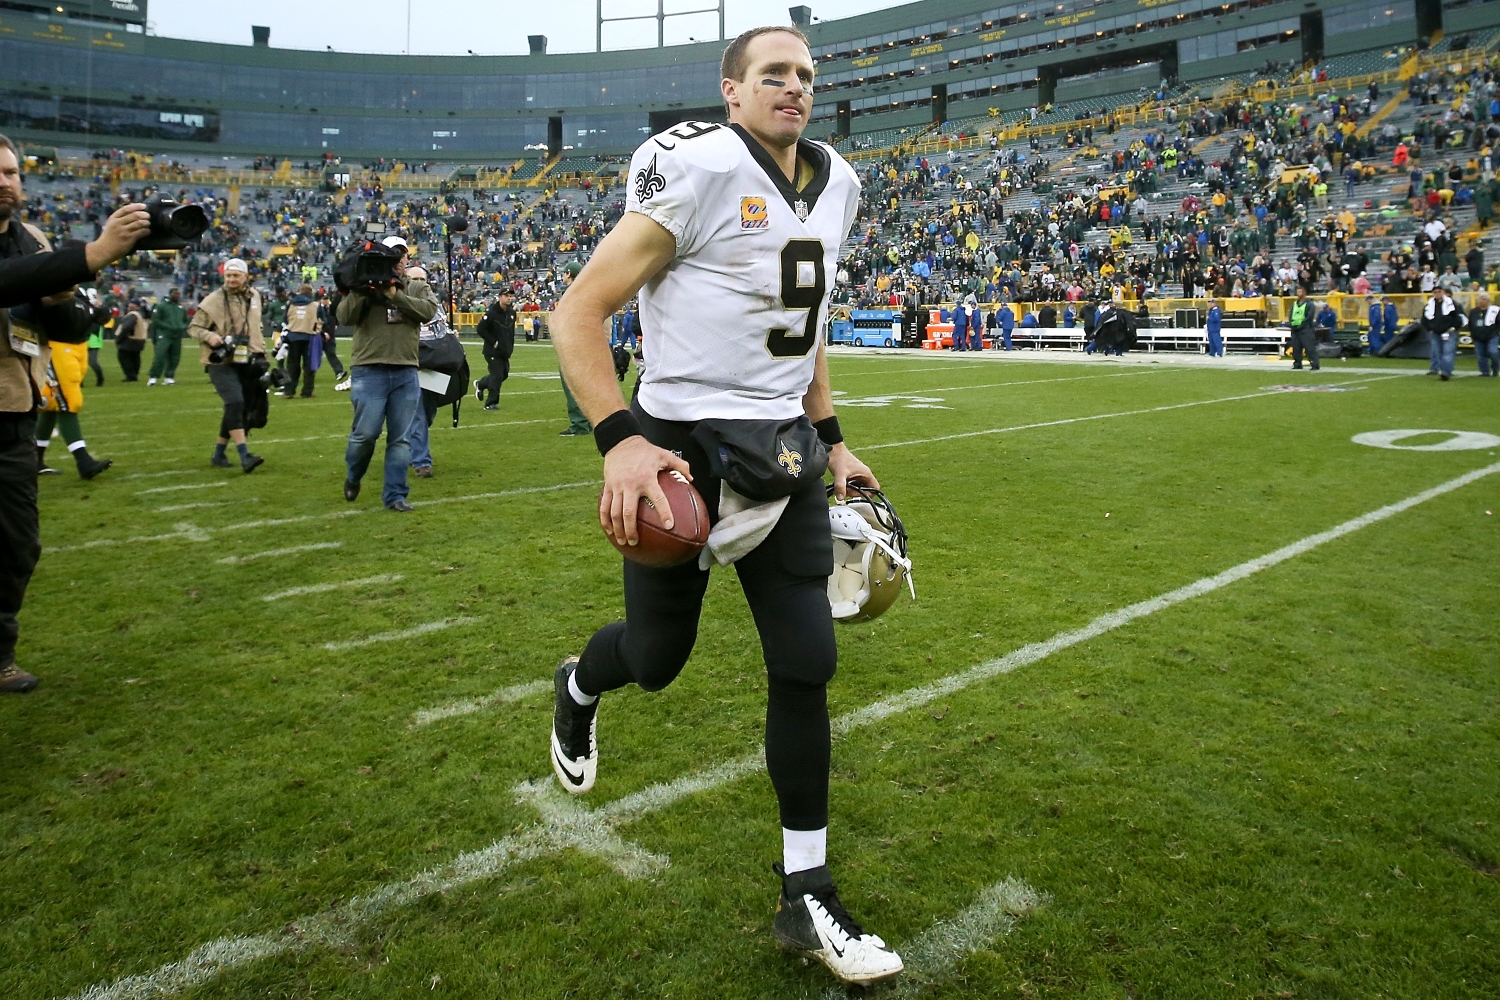 New Orleans Saints quarterback Drew Brees jogs off the field after a road victory against the Green Bay Packers.